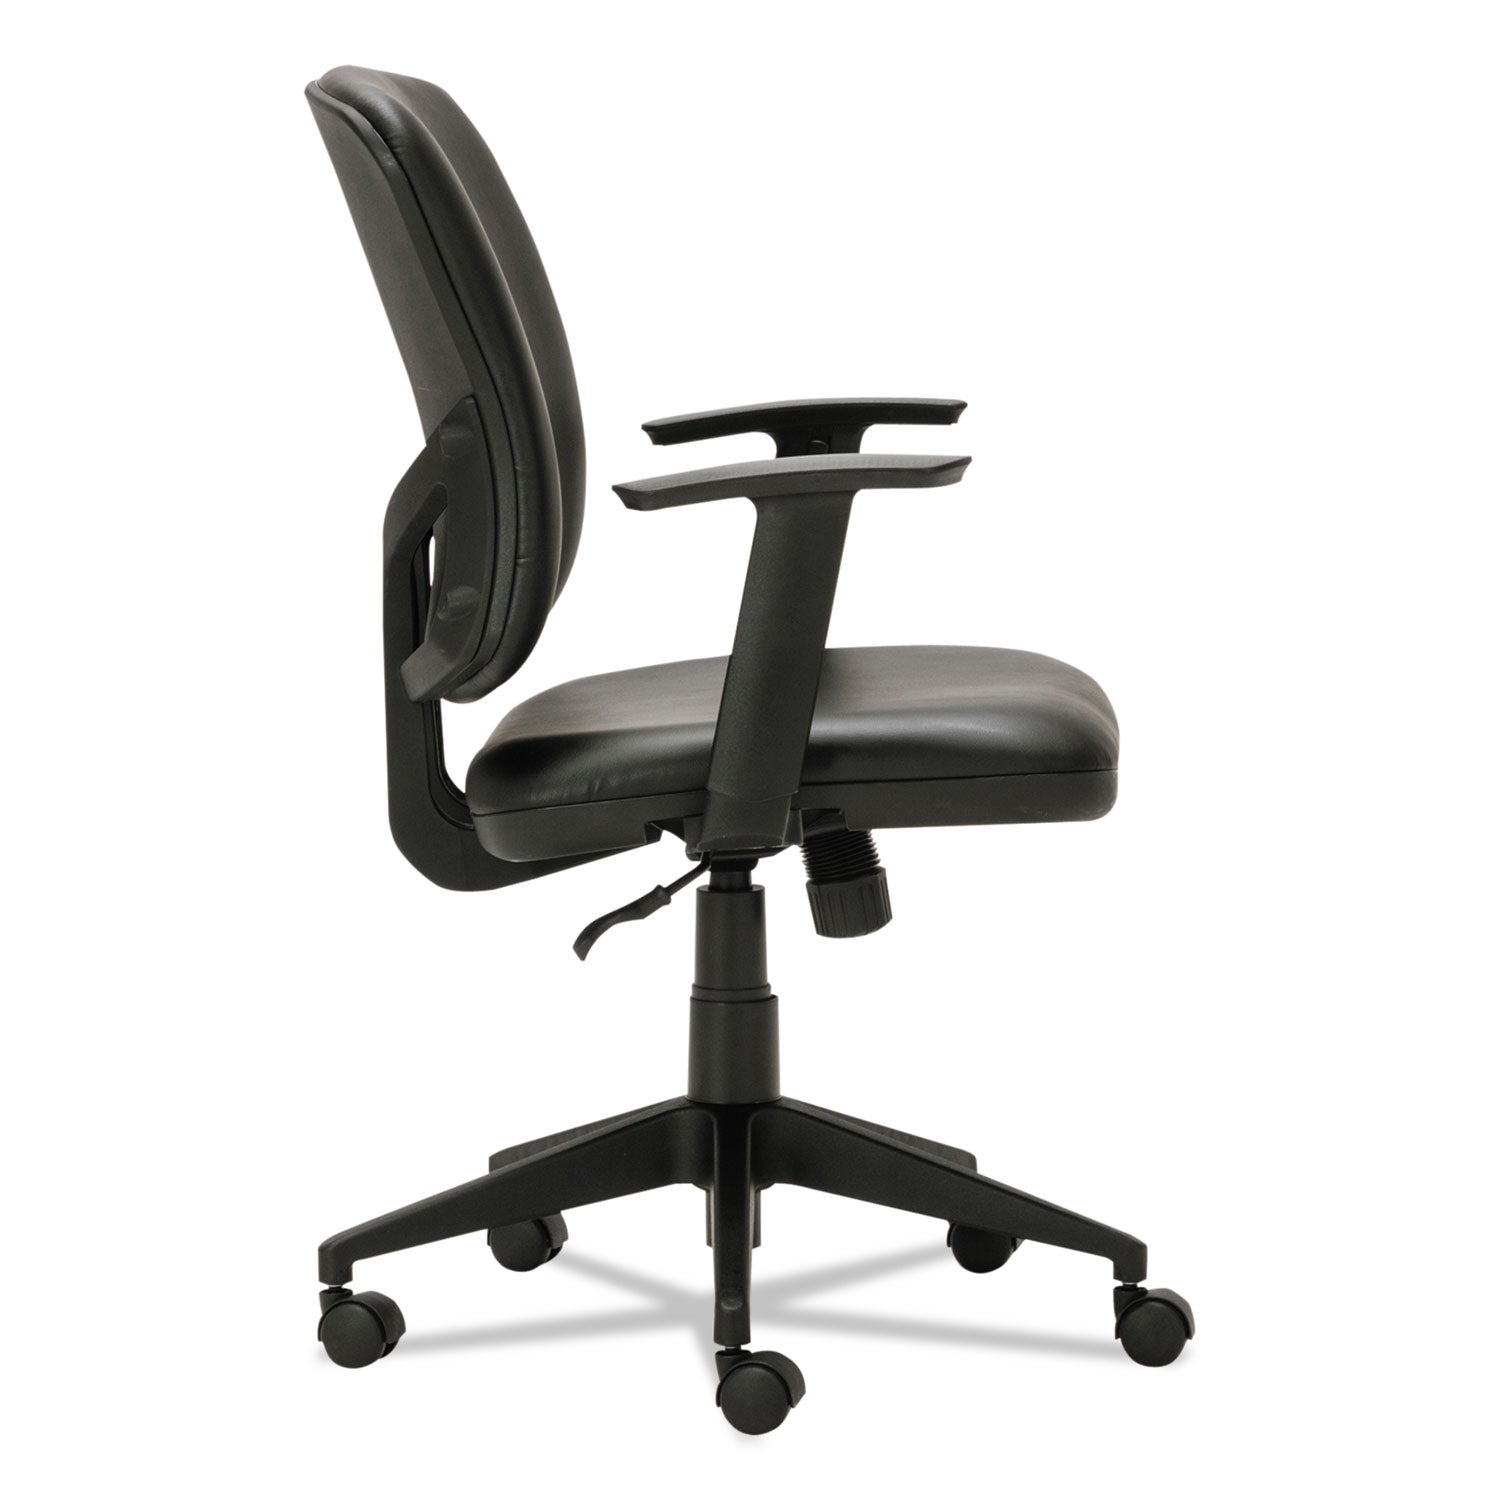 alera-everyday-task-office-chair-bonded-leather-seat-back-supports-up-to-275-lb-176-to-215-seat-height-black_alete4819 - 3